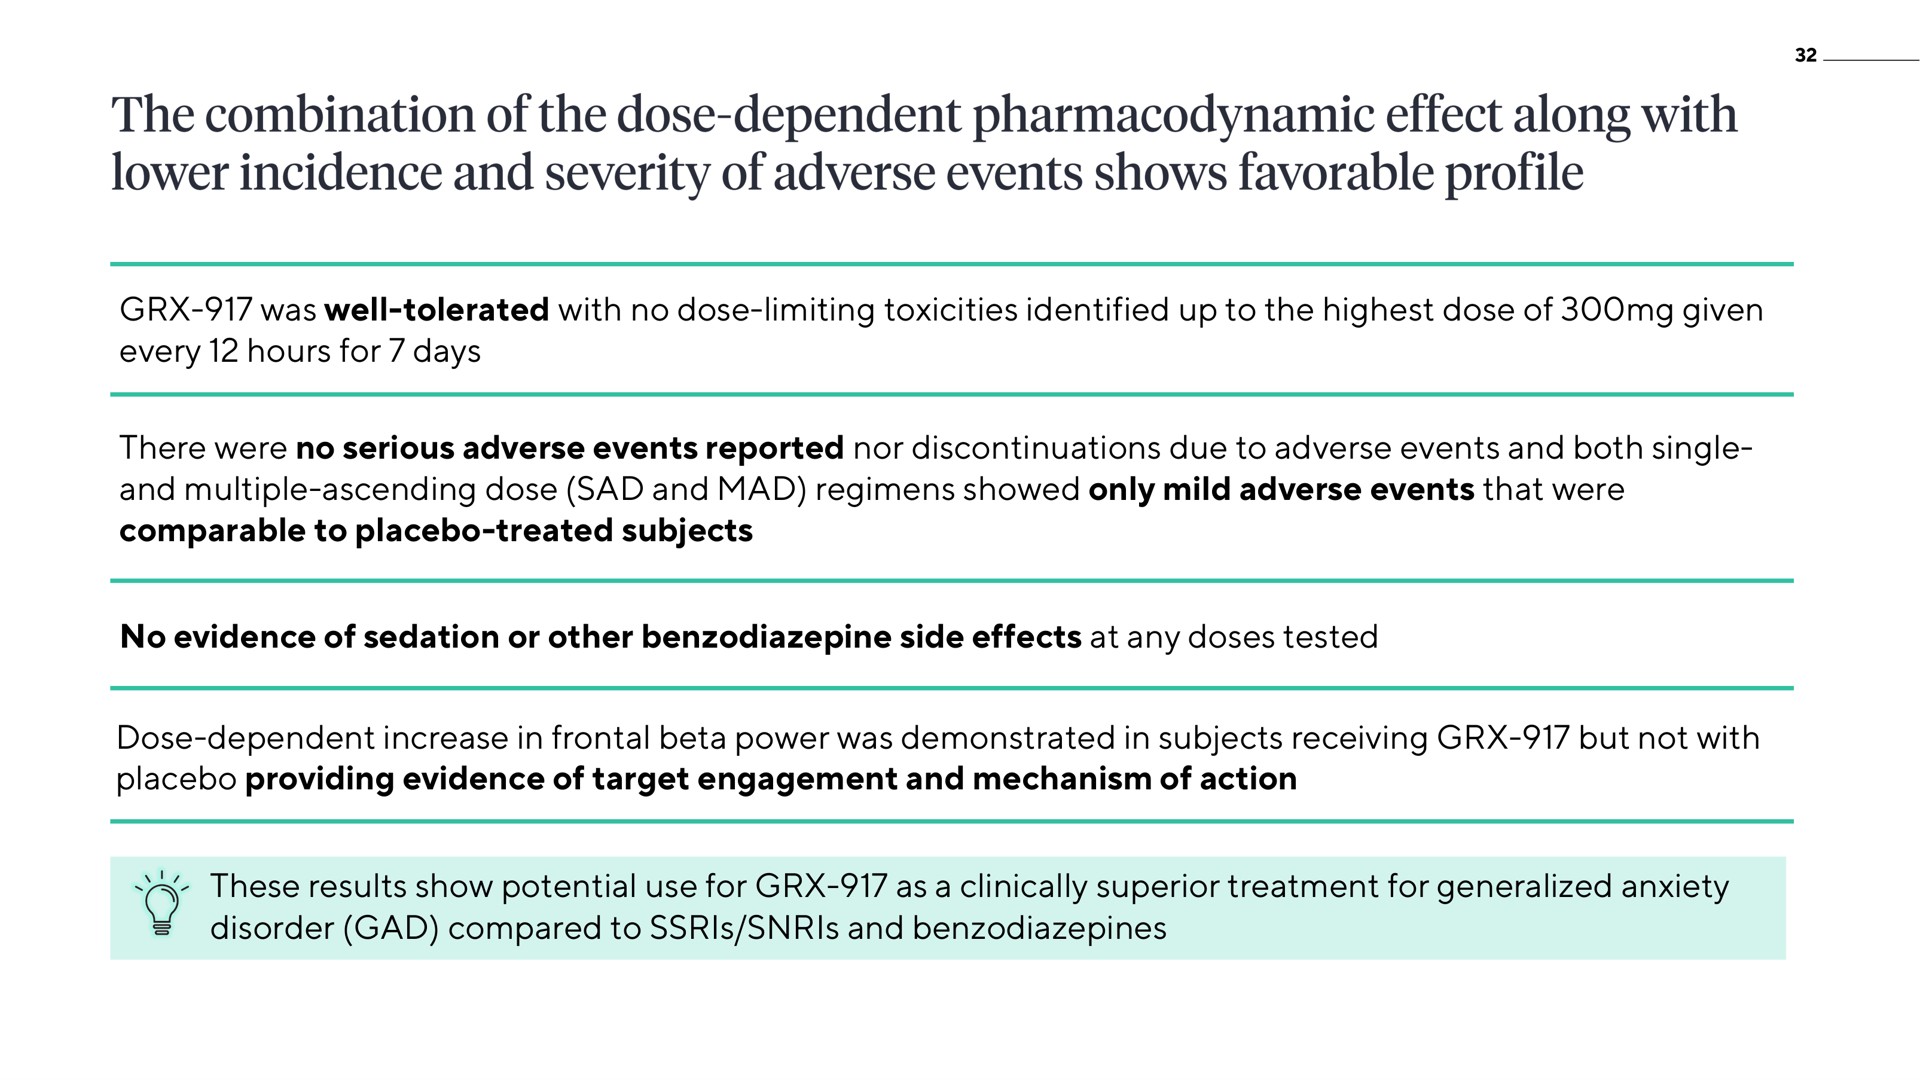 was well tolerated with no dose limiting toxicities identified up to the highest dose of given every hours for days there were no serious adverse events reported nor discontinuations due to adverse events and both single and multiple ascending dose sad and mad regimens showed only mild adverse events that were comparable to placebo treated subjects no evidence of sedation or other side effects at any doses tested dose dependent increase in frontal beta power was demonstrated in subjects receiving but not with placebo providing evidence of target engagement and mechanism of action these results show potential use for as a clinically superior treatment for generalized anxiety disorder gad compared to and combination pharmacodynamic effect along lower incidence severity shows favorable profile | ATAI